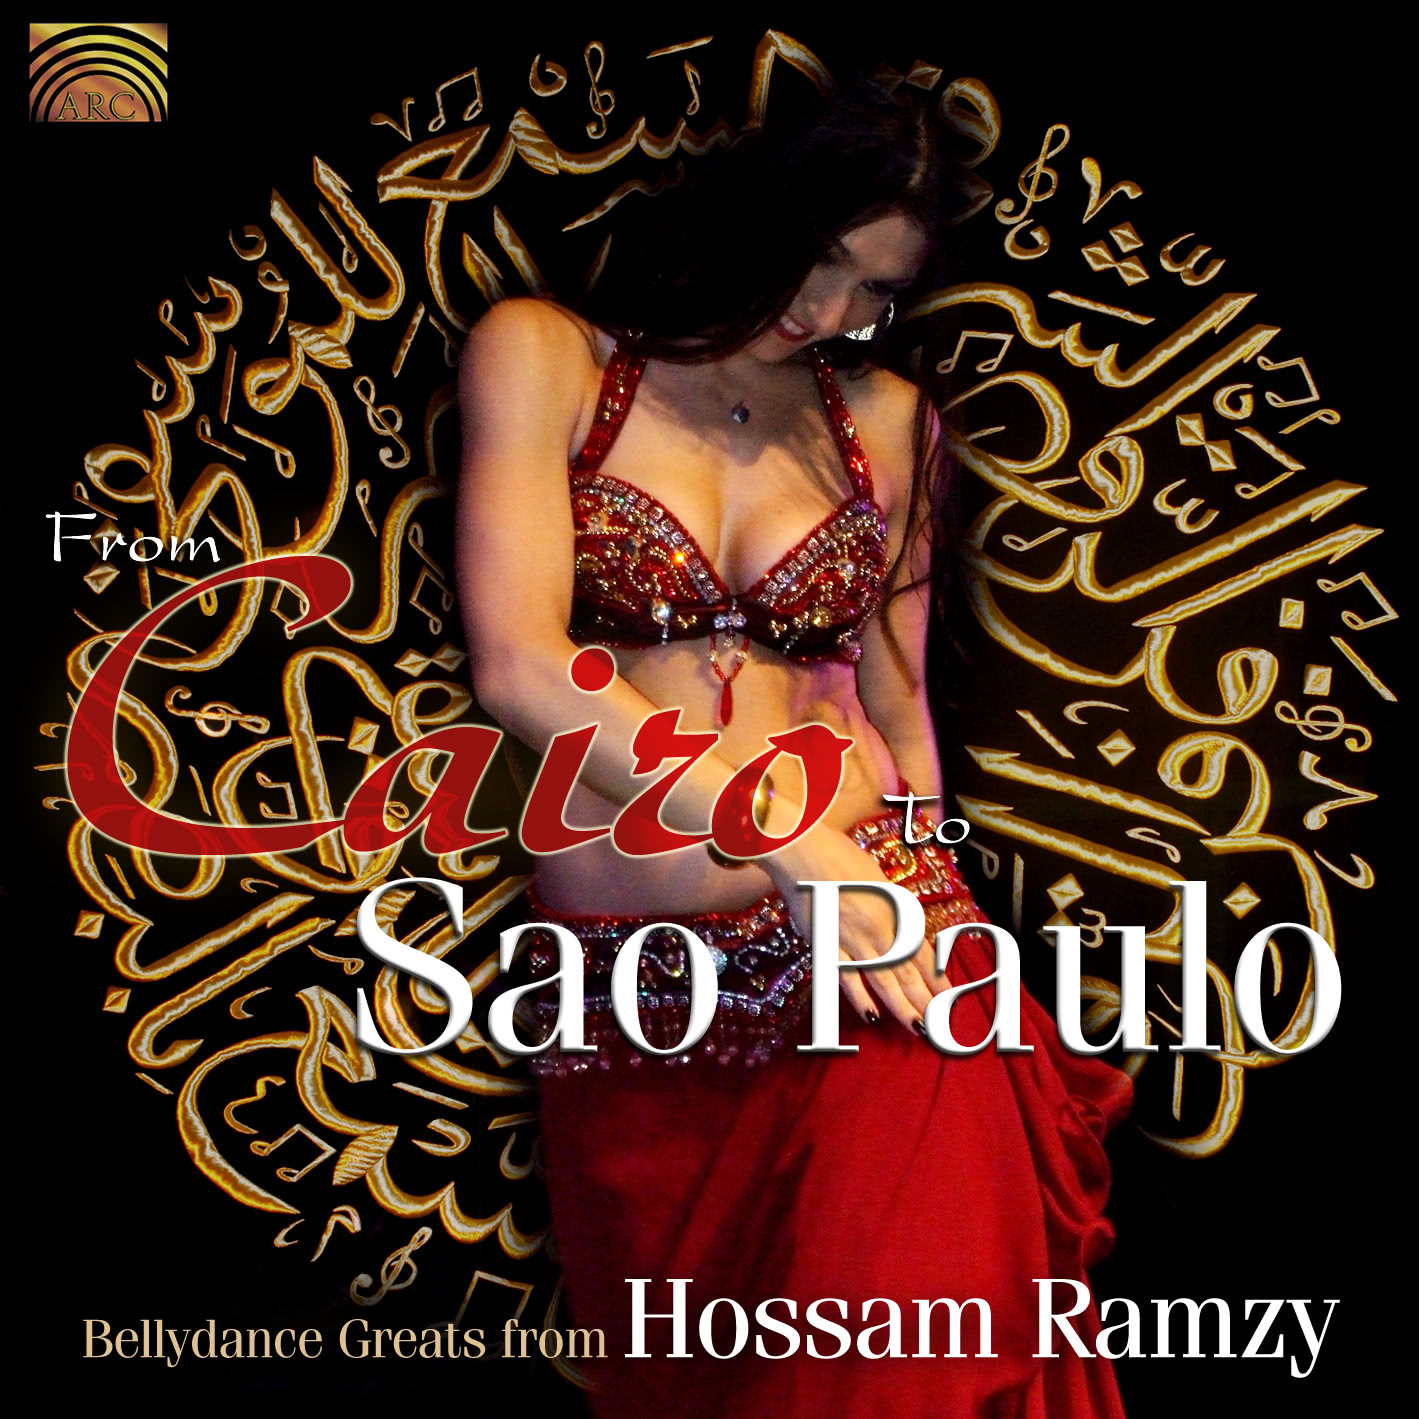 EUCD2336 From Cairo to Sao Paulo - Bellydance Greats from Hossam Ramzy